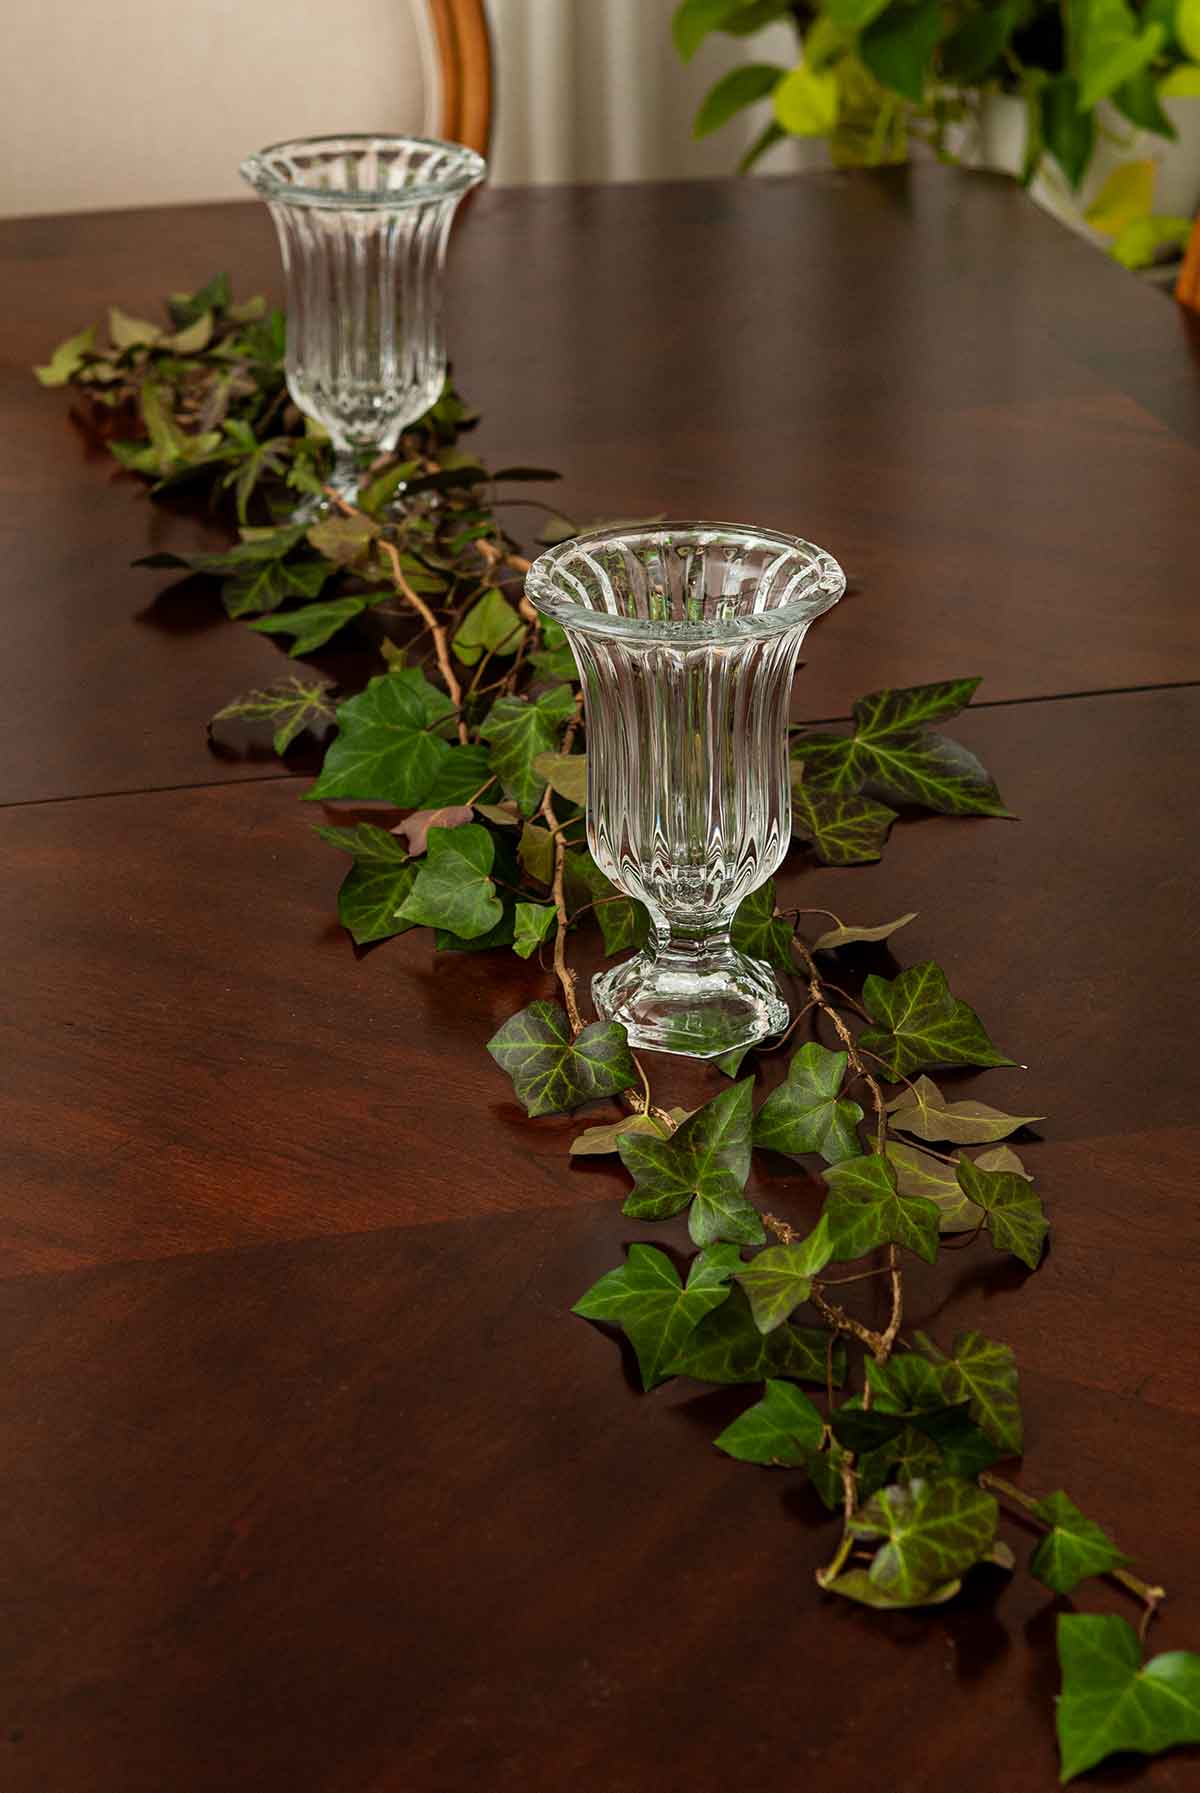 A table with 2 vines of ivy and 2 glass vases.